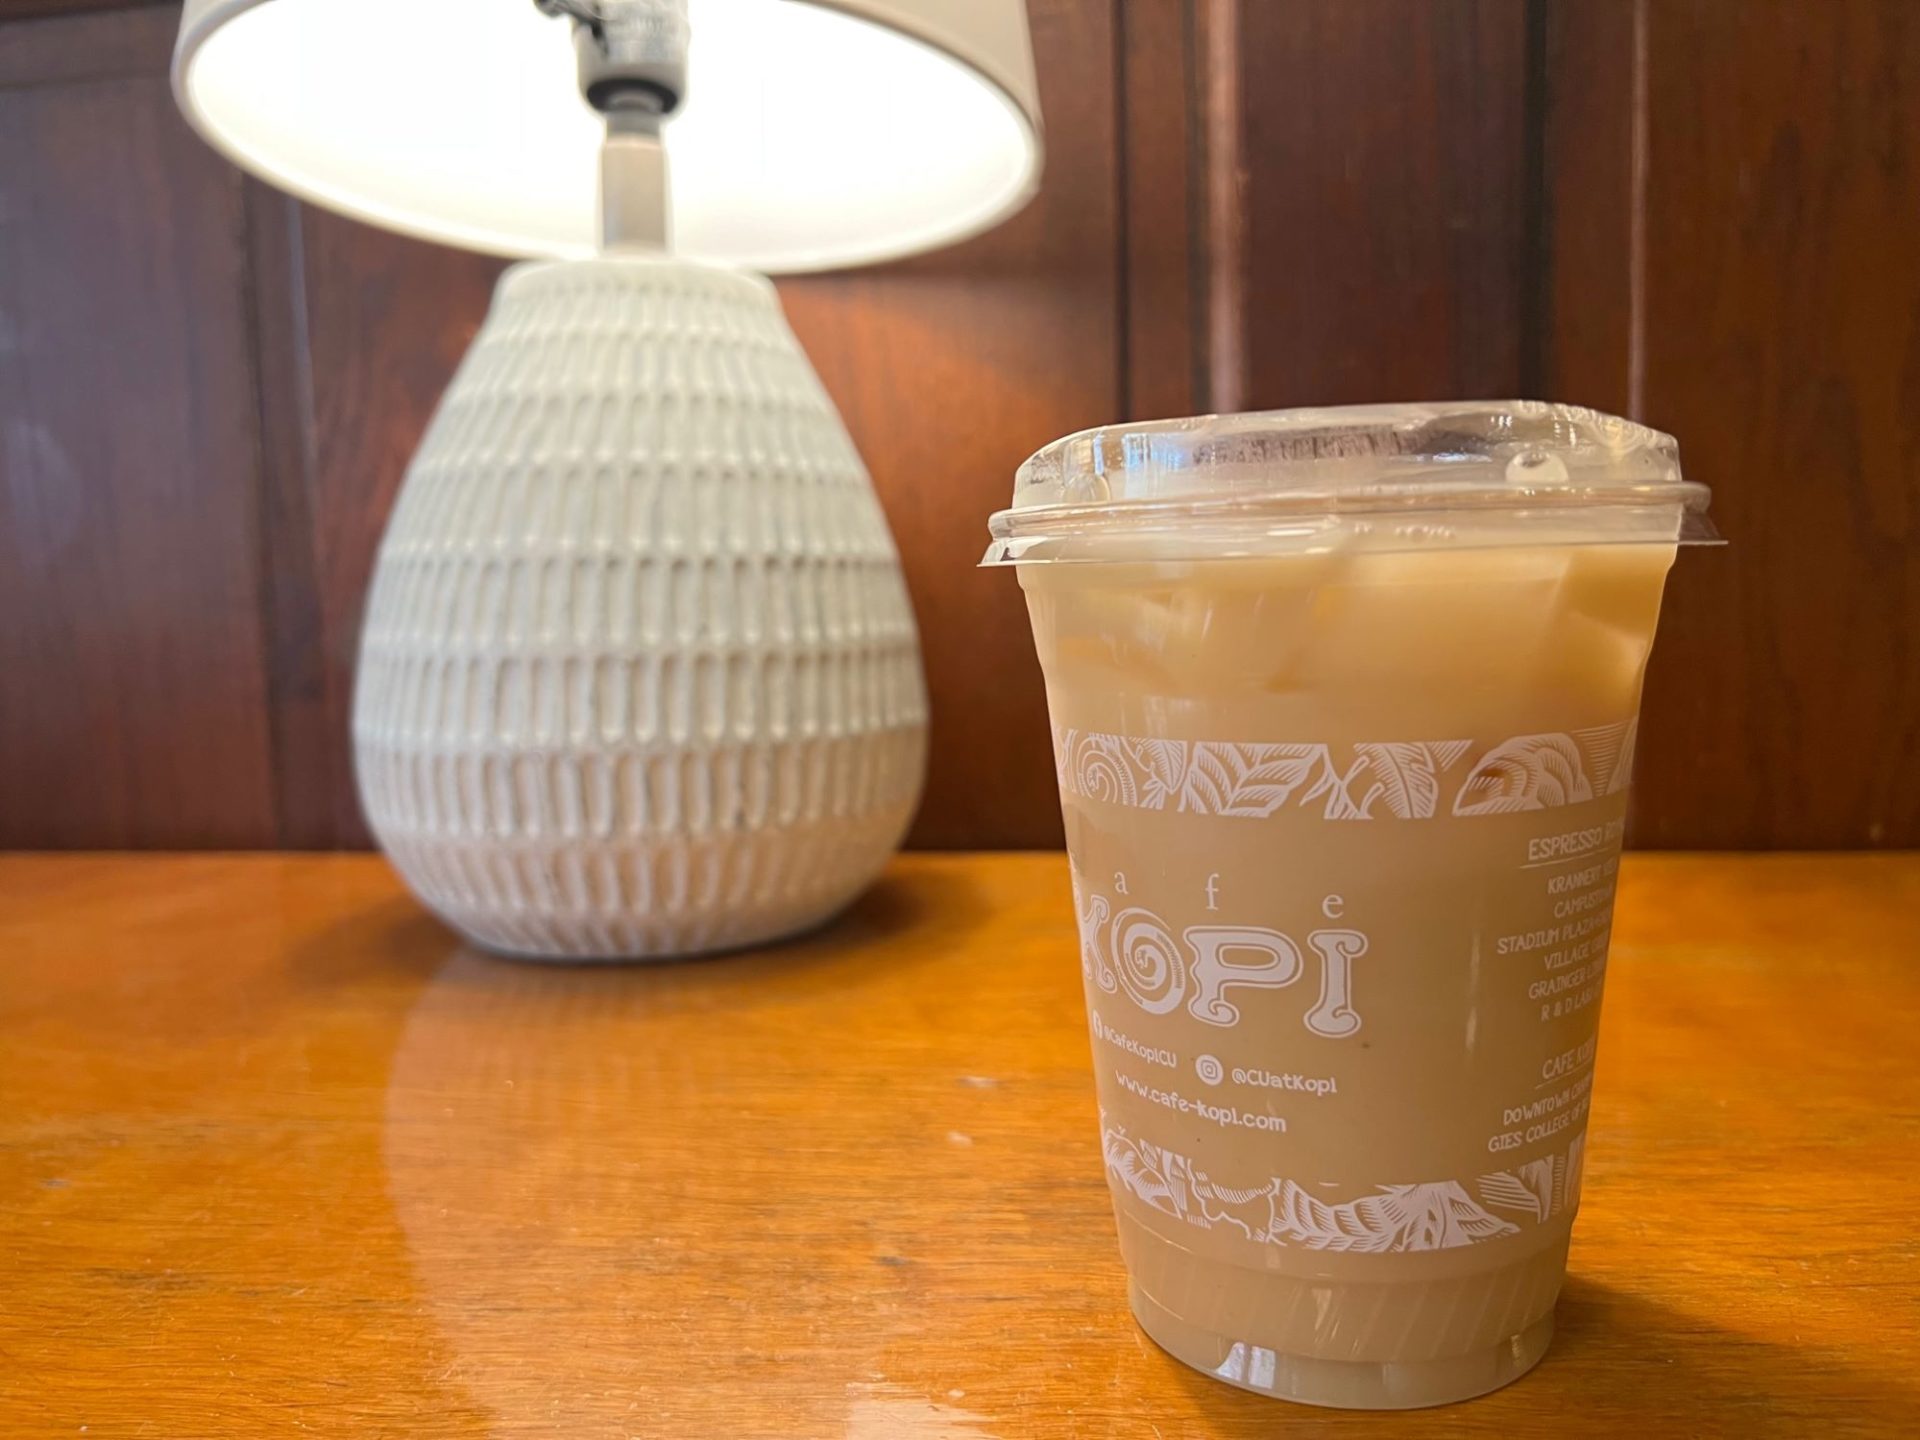 A plastic cup is filled with a light brown liquid, sitting on a light wood table with a small white lamp.